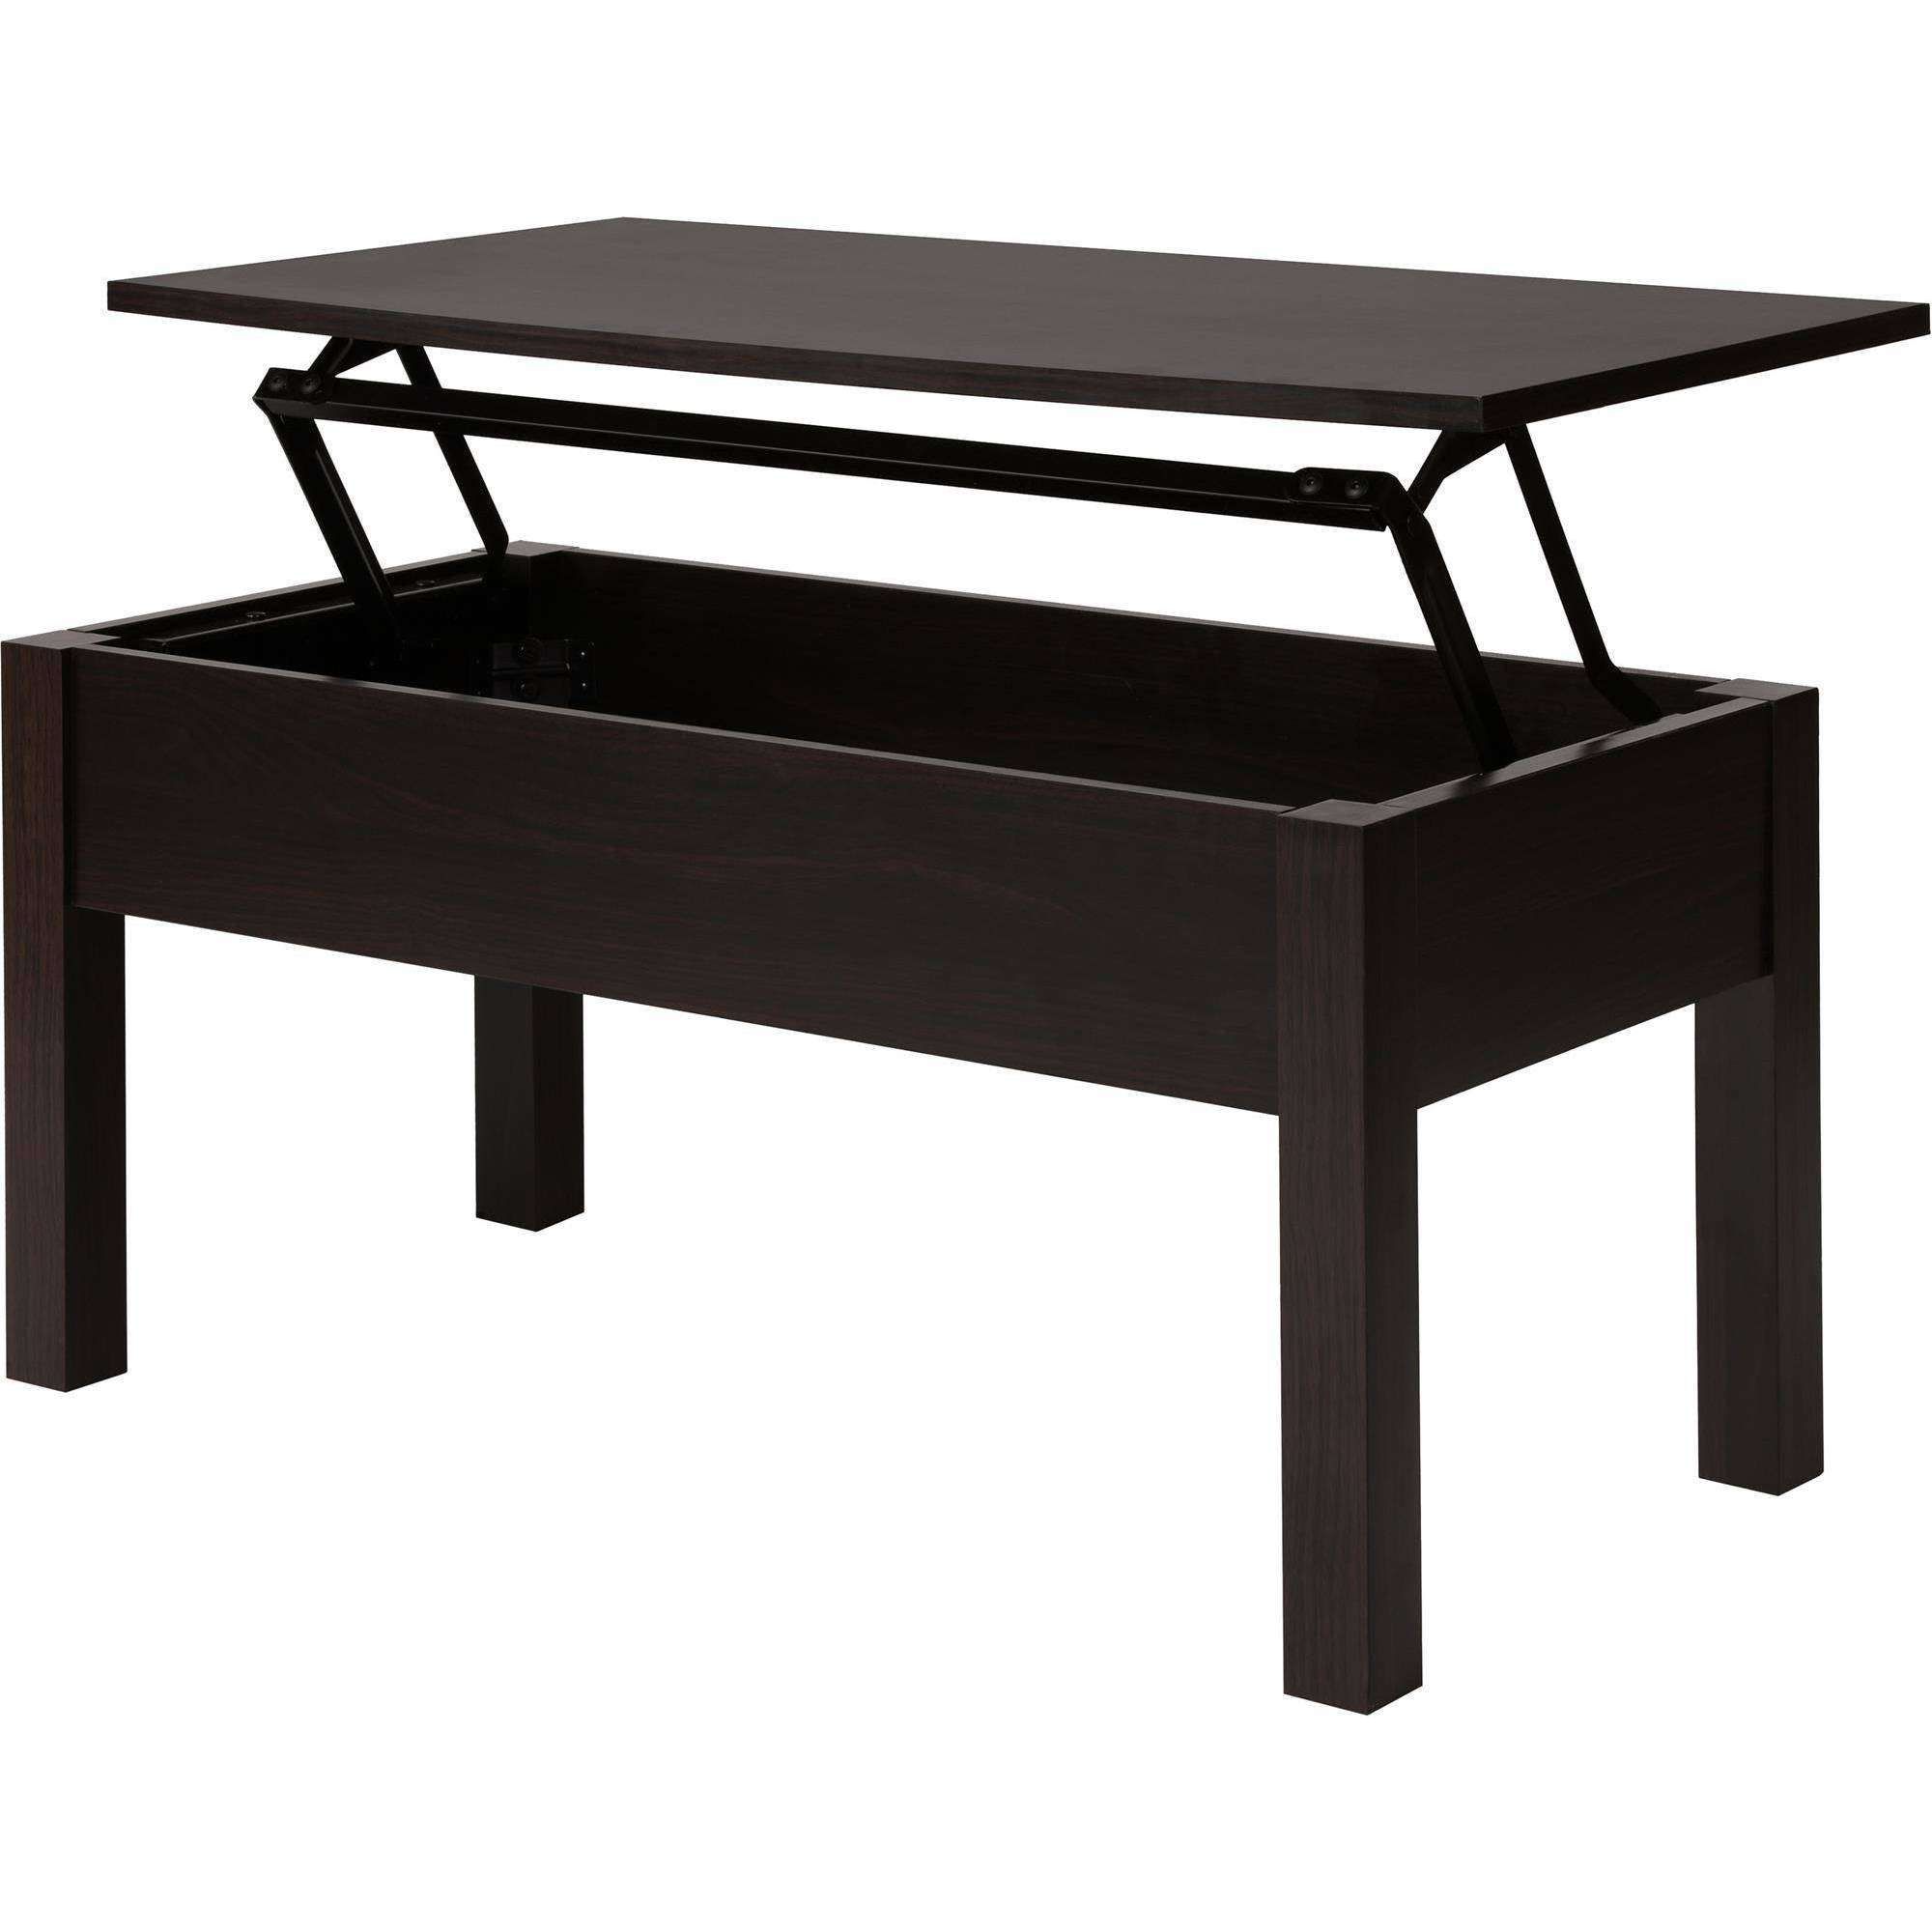 Popular Coffee Tables With Lifting Top In Coffee Tables : Exquisite Lift Top Coffee Table Hinges White Up (View 8 of 20)